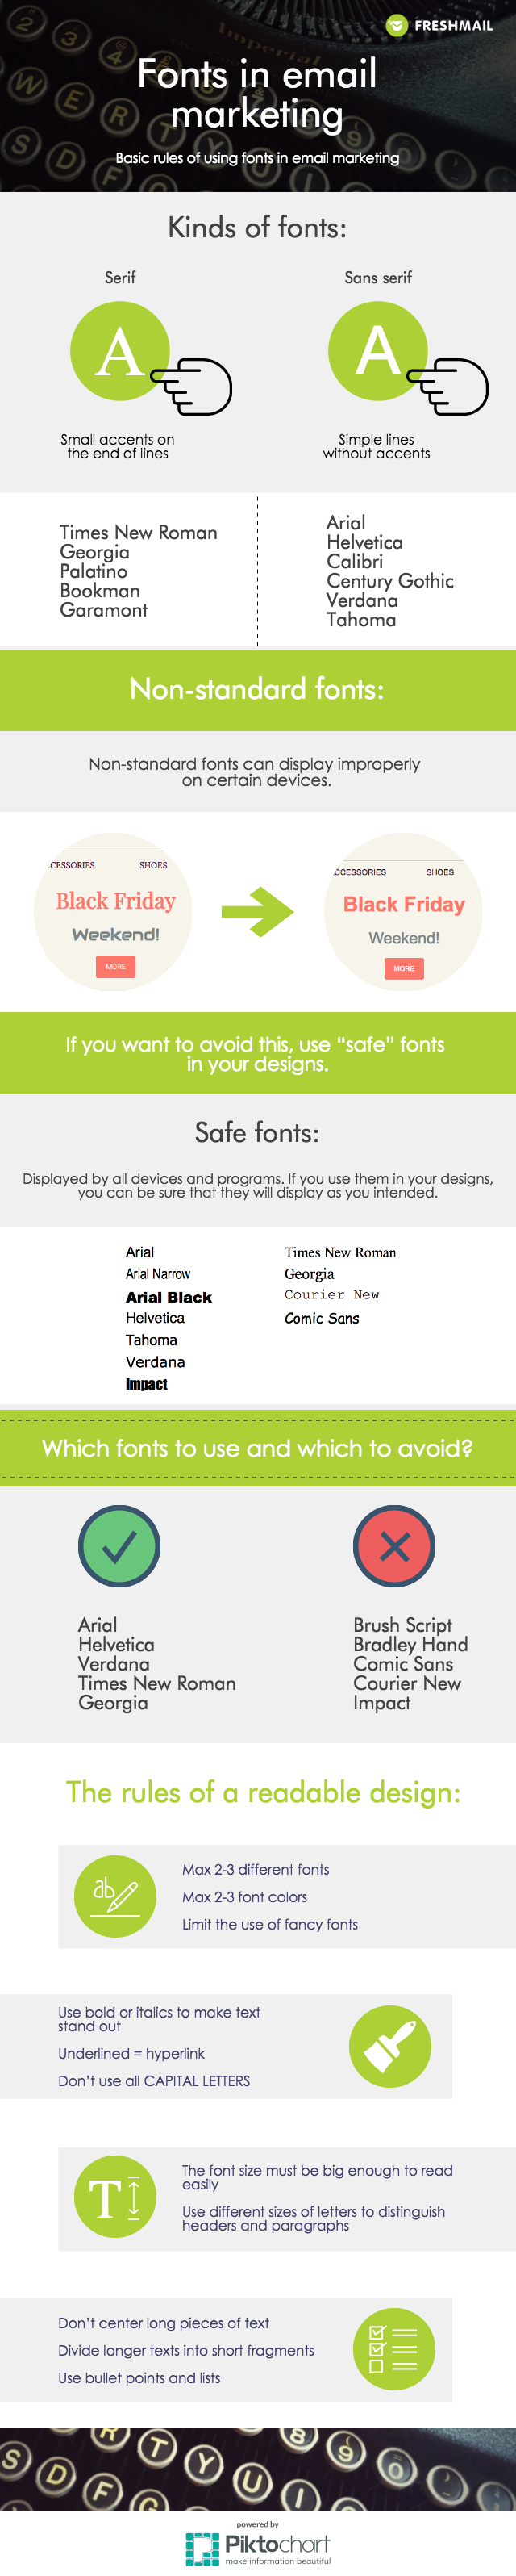 Fonts in email marketing